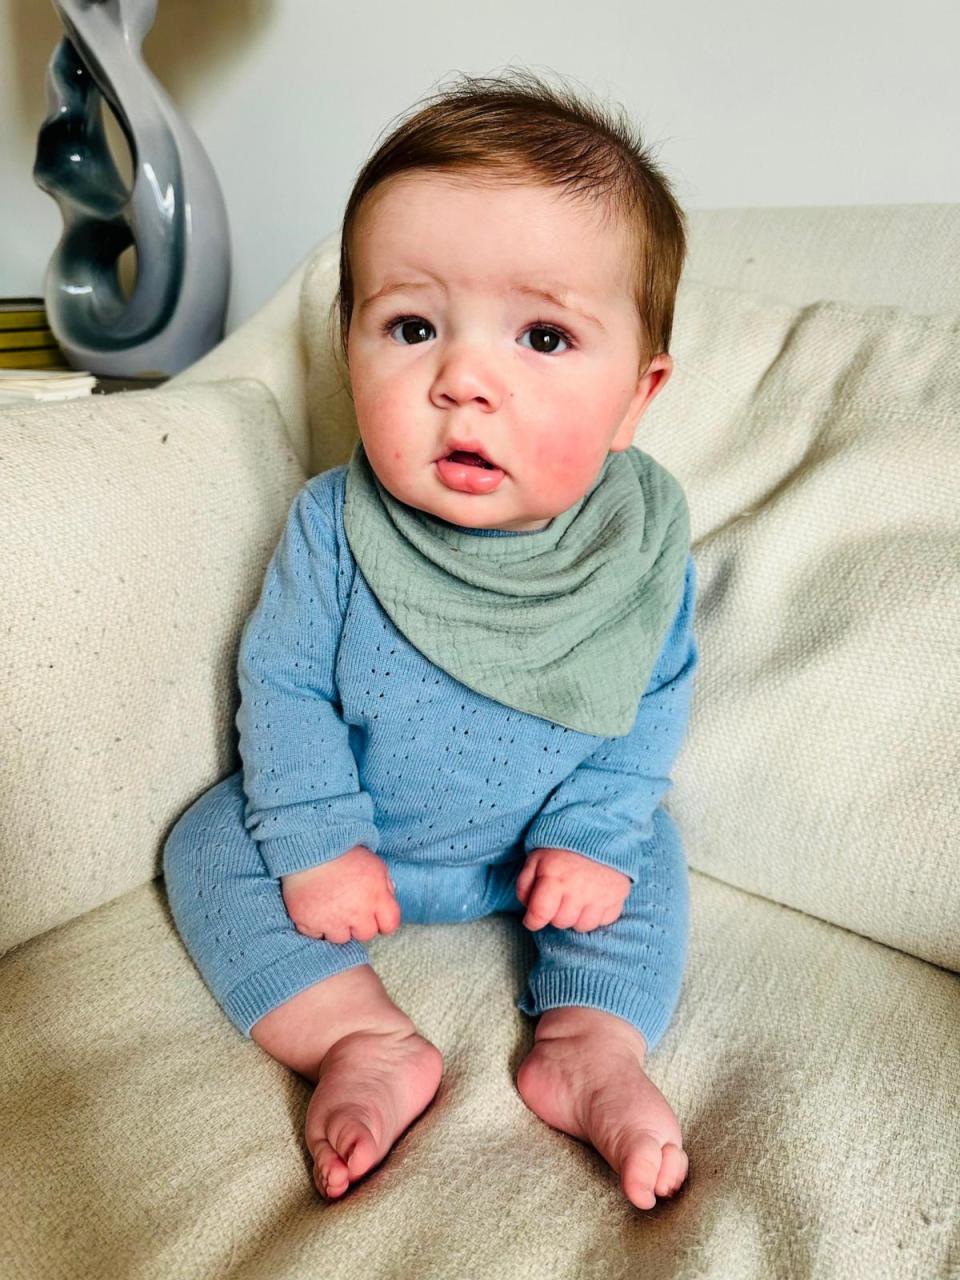 PHOTO: Chance is now five months old, and his mom Sarrah Strimel Bentley playfully calls him a “trickster.” (Courtesy of Sarrah Strimel Bentley)